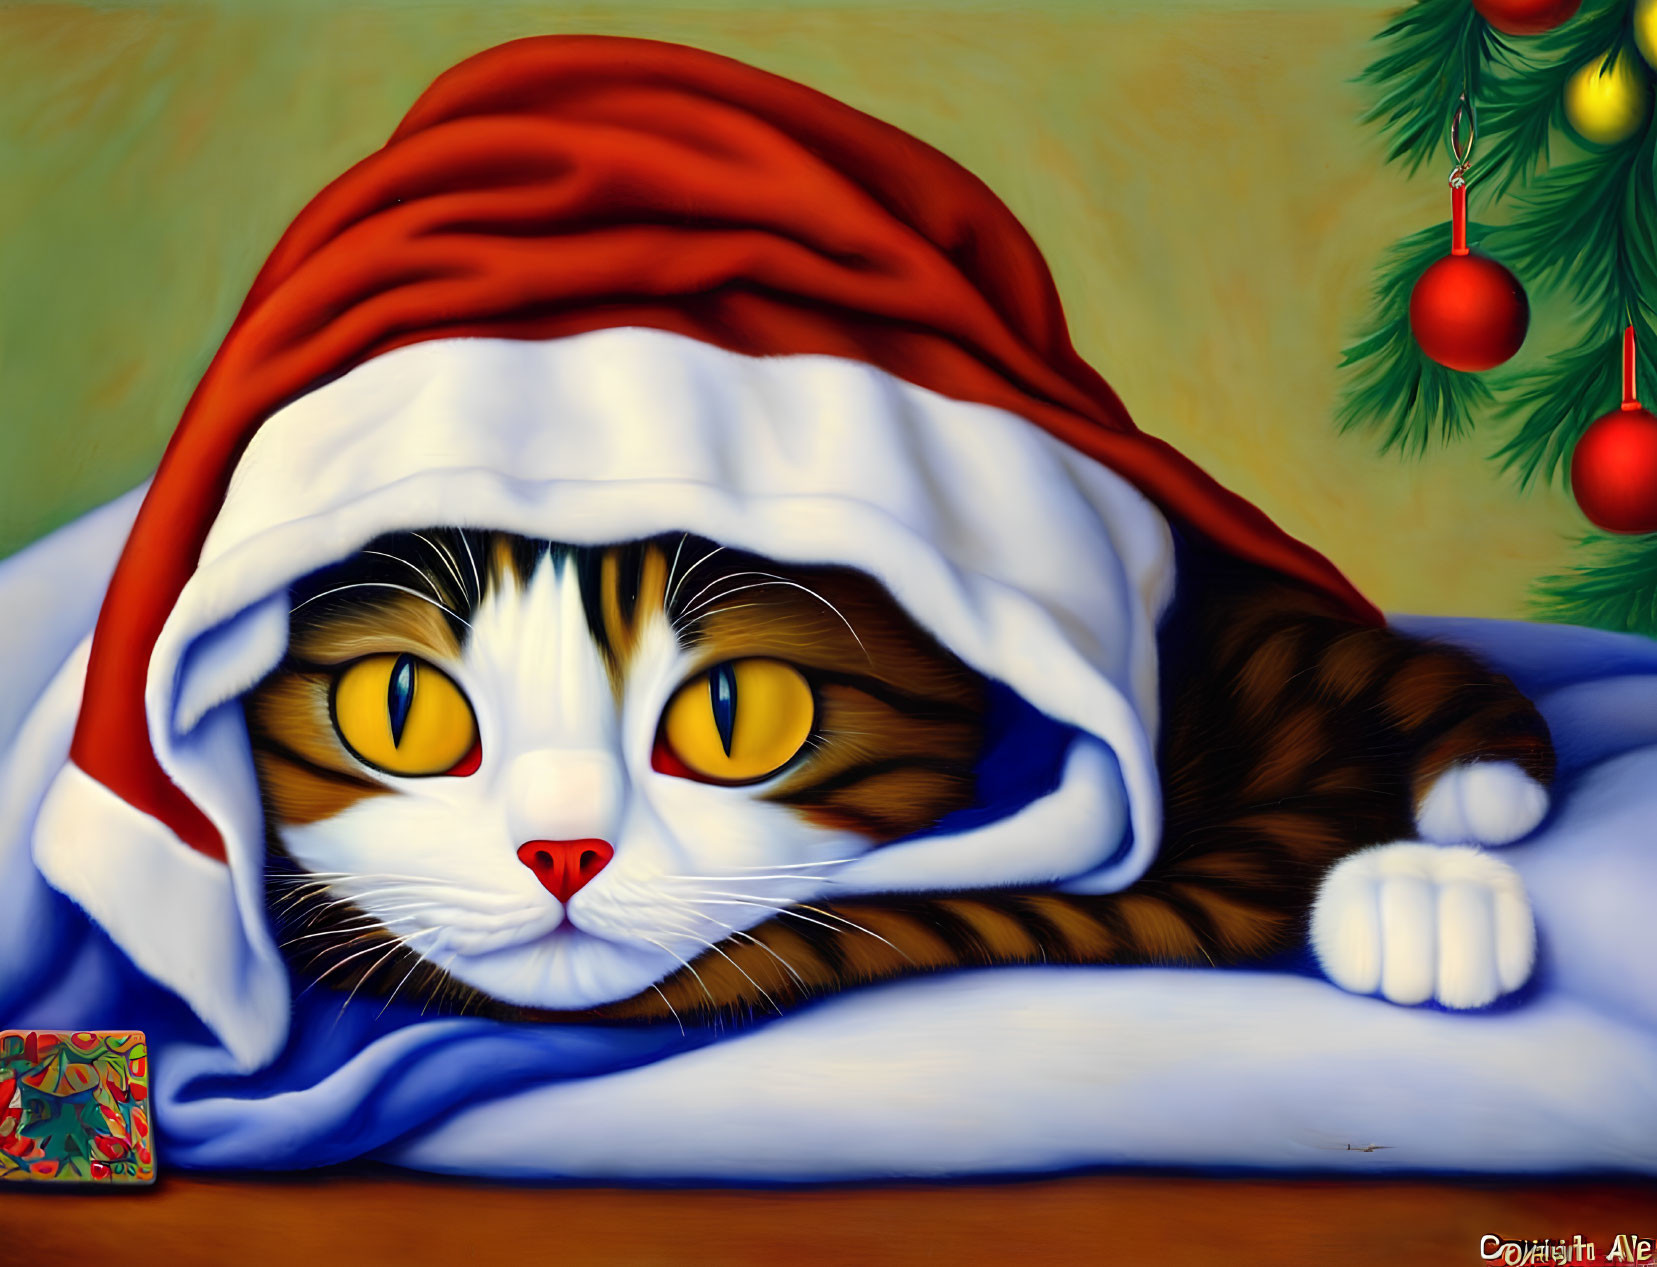 Tabby cat with yellow eyes in Santa hat under blanket with Christmas decor